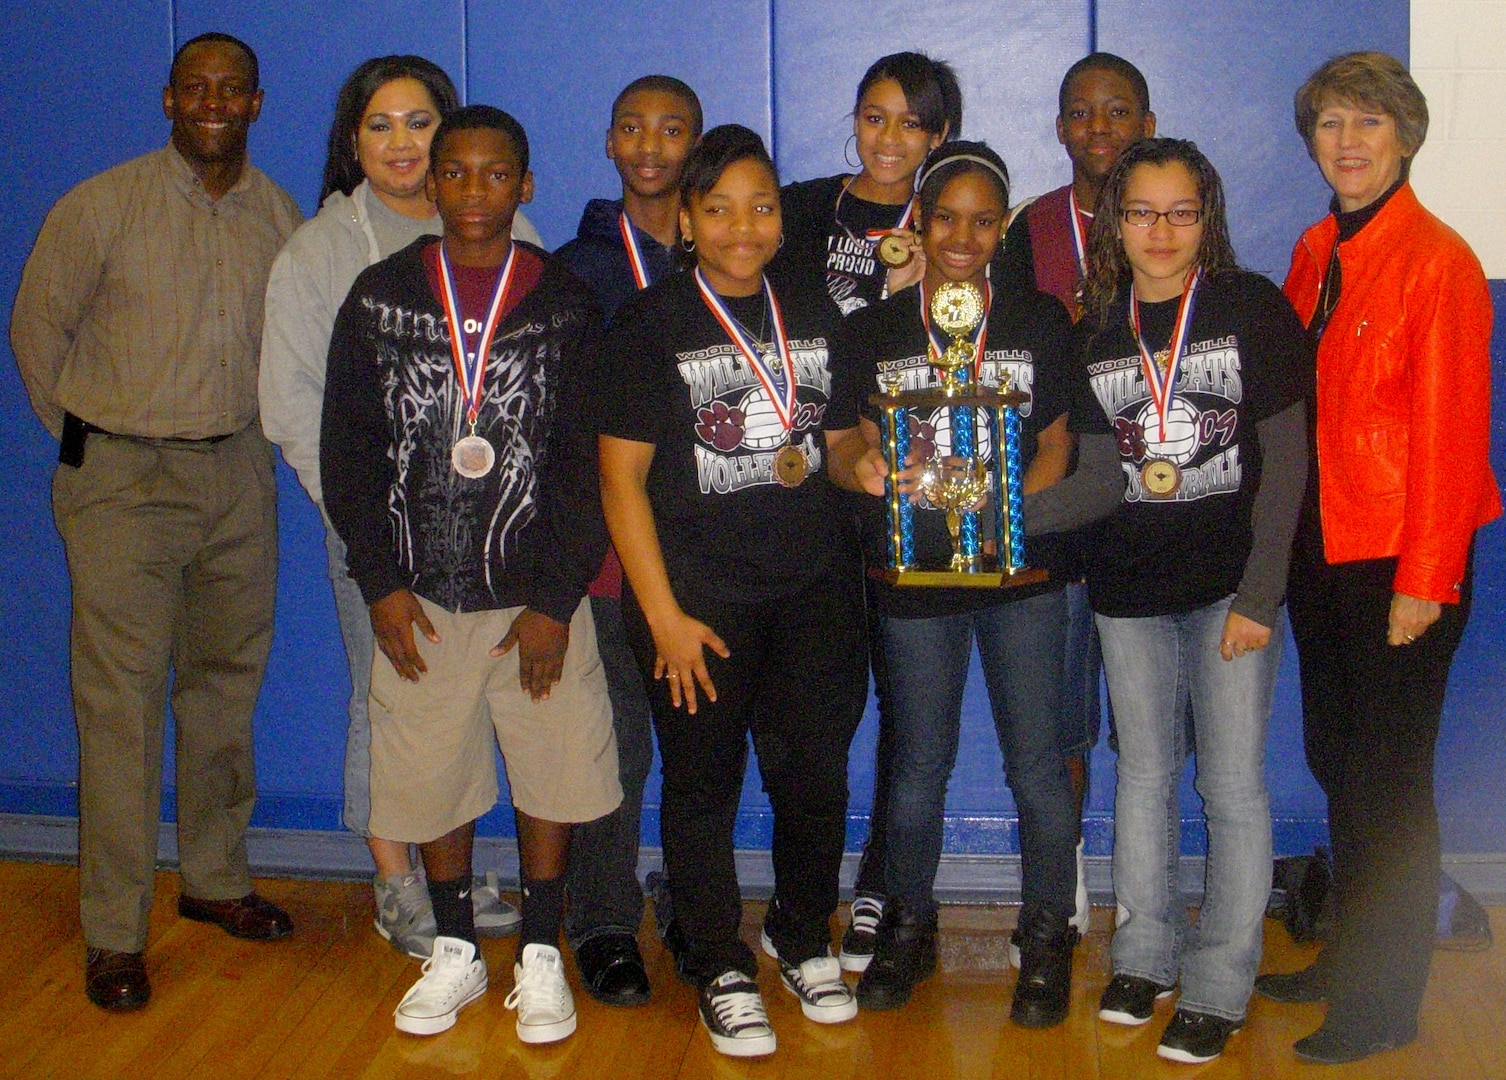 Students of Woodlake Hills Middle School show off their trophy and
individual medallions after winning their division in the annual African
American Heritage Knowledge Bowl at Randolph High School here. Competition judges, Maj. Gen. K.C. McClain, commander of the Air
Force Personnel Center, and Maj. William Collins, chairman of the African
American Heritage Committee, share the spotlight. This winning team
consisted of Krishae Wallace-Ball, Tiara Egglestin, Stephanie Santana,
Joshua Tyler, Cedric Williams, Ondrea Spearman and Willie Davis. The coach
was Teonna Rector. (Courtesy photo)
